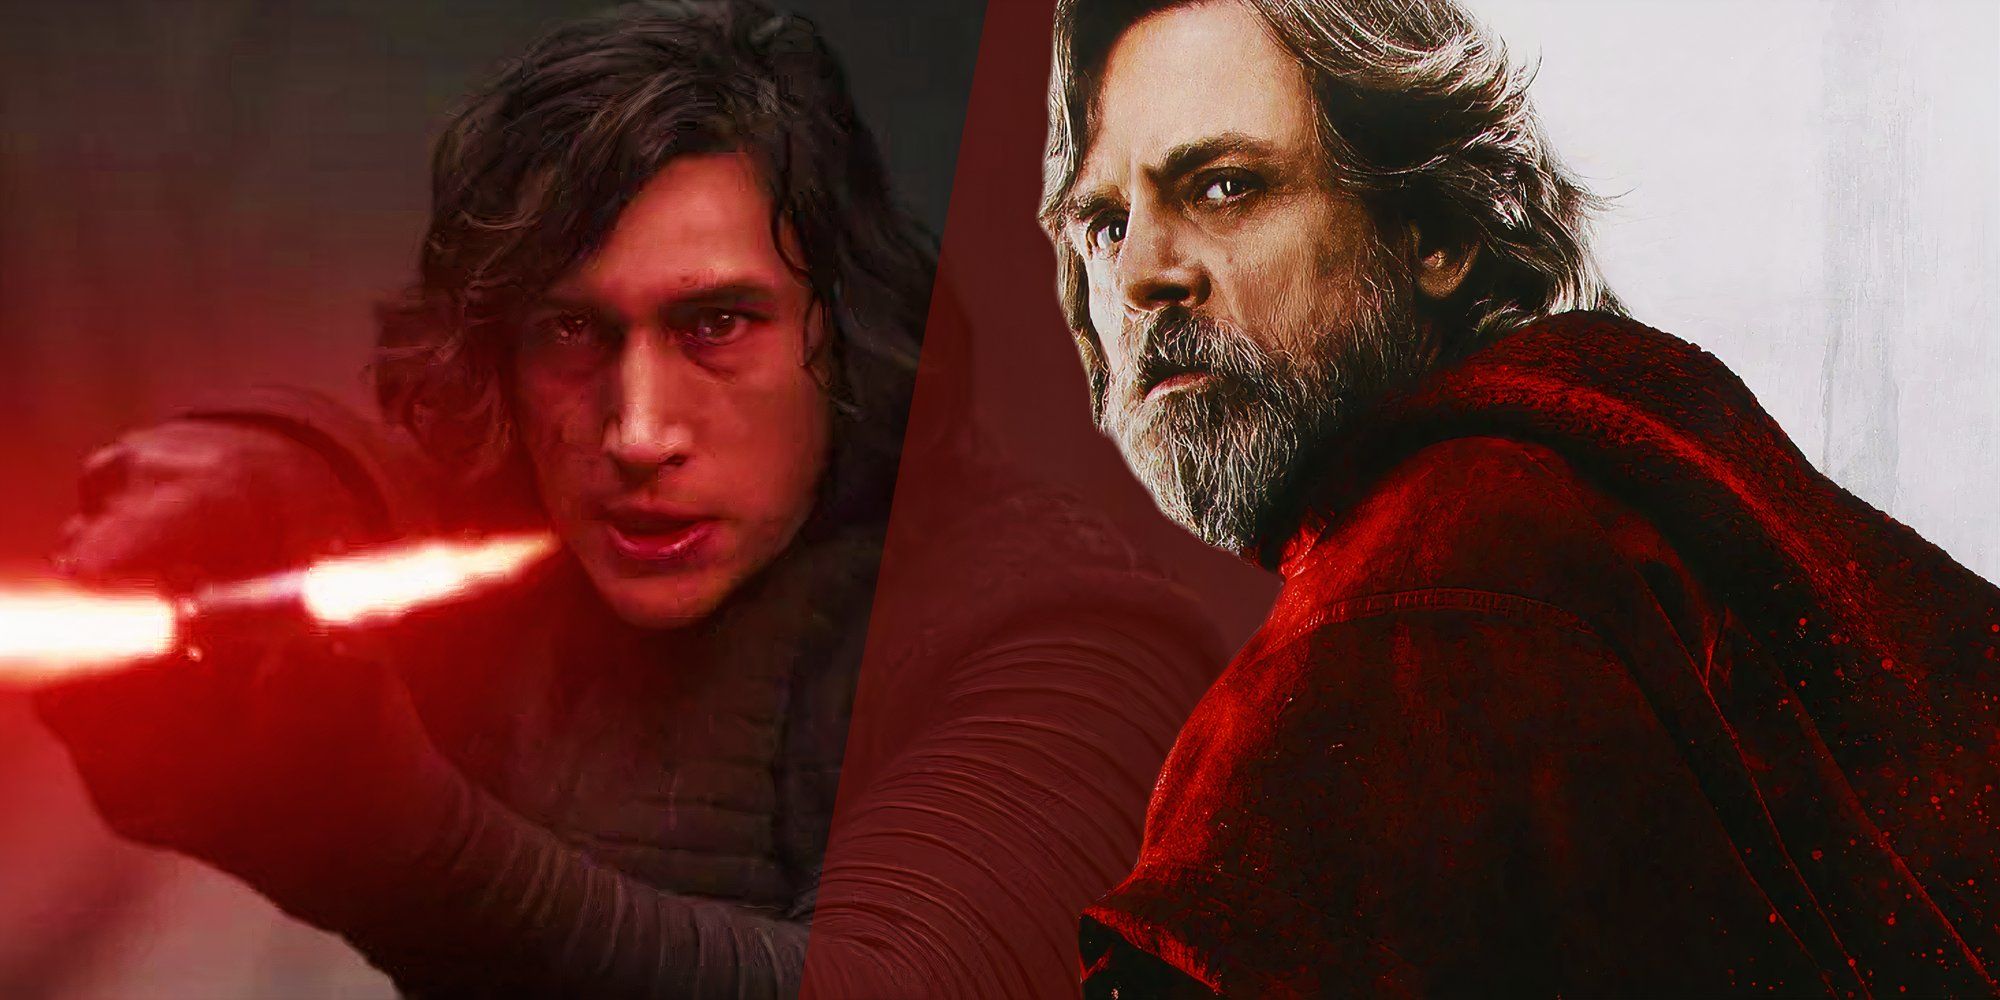 Mark Hamill as Luke Skywalker in the poster for  The Last Jedi (2017) next to Adam Driver raising his lightsaber as Kylo Ren